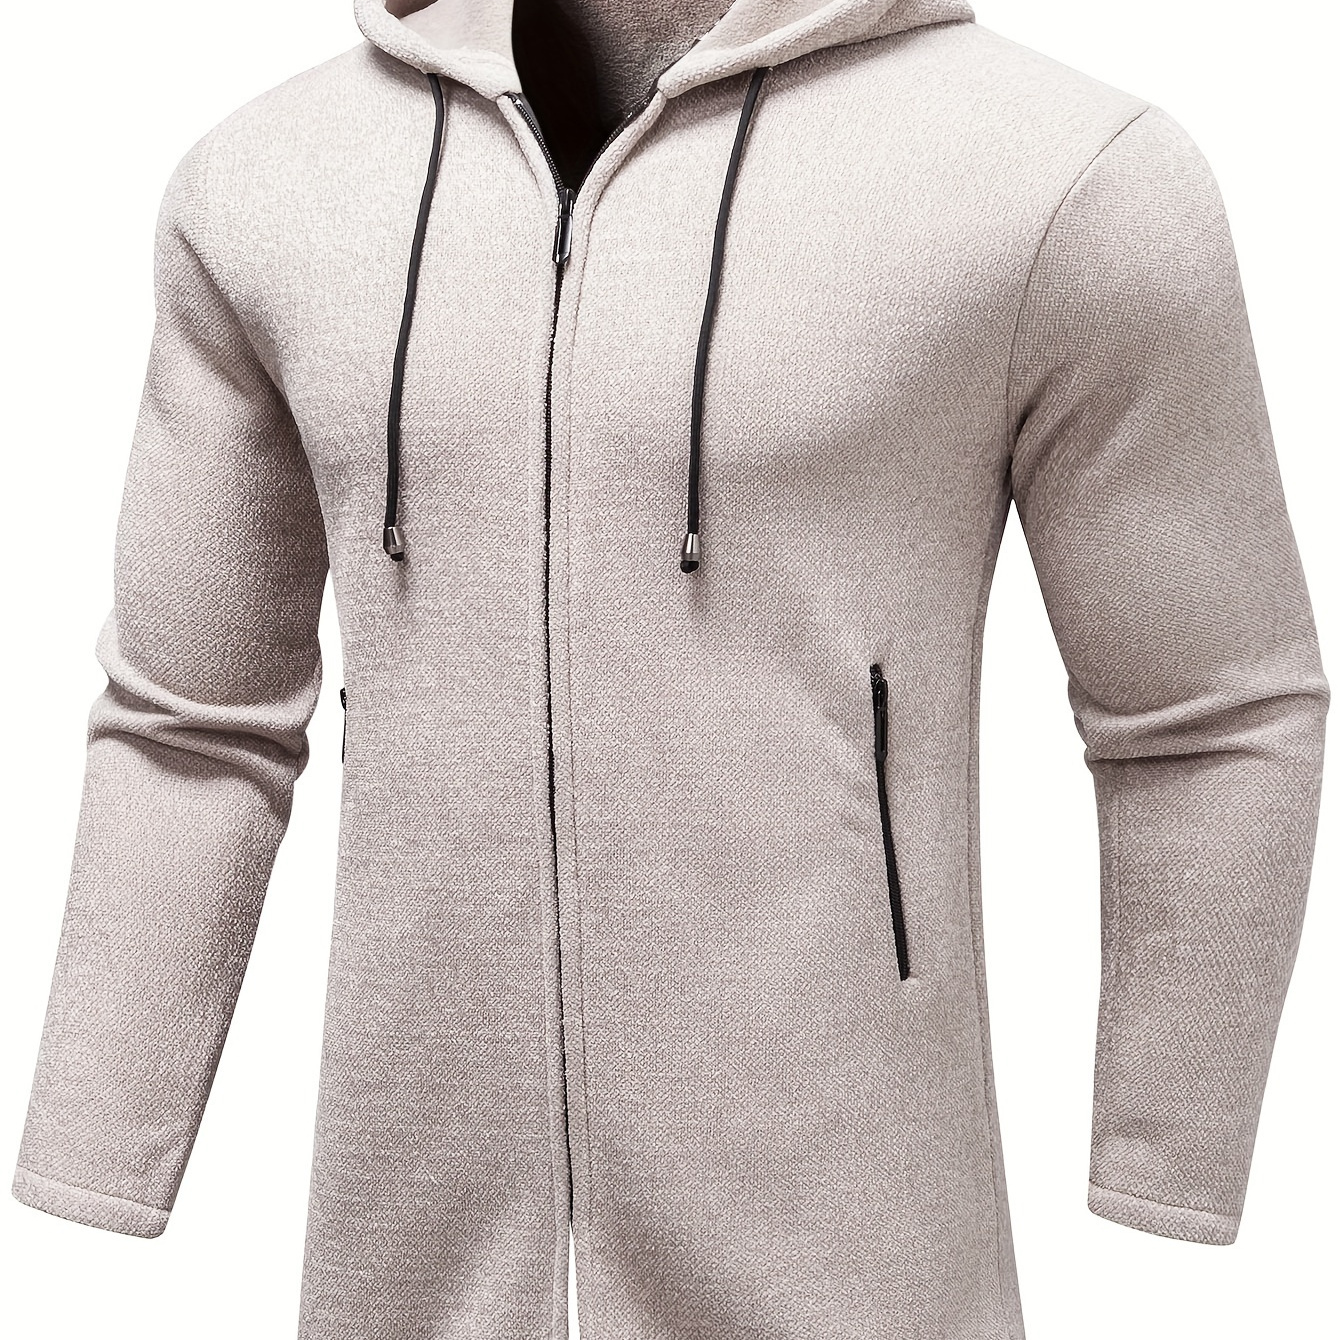 

Men's Mid Long Comfy And Warm Solid Hooded Long Sleeve And Zipper Down Knit Sweater Jacket With Zippered Pockets, Casual Jacket For Autumn And Winter Outdoors Wear